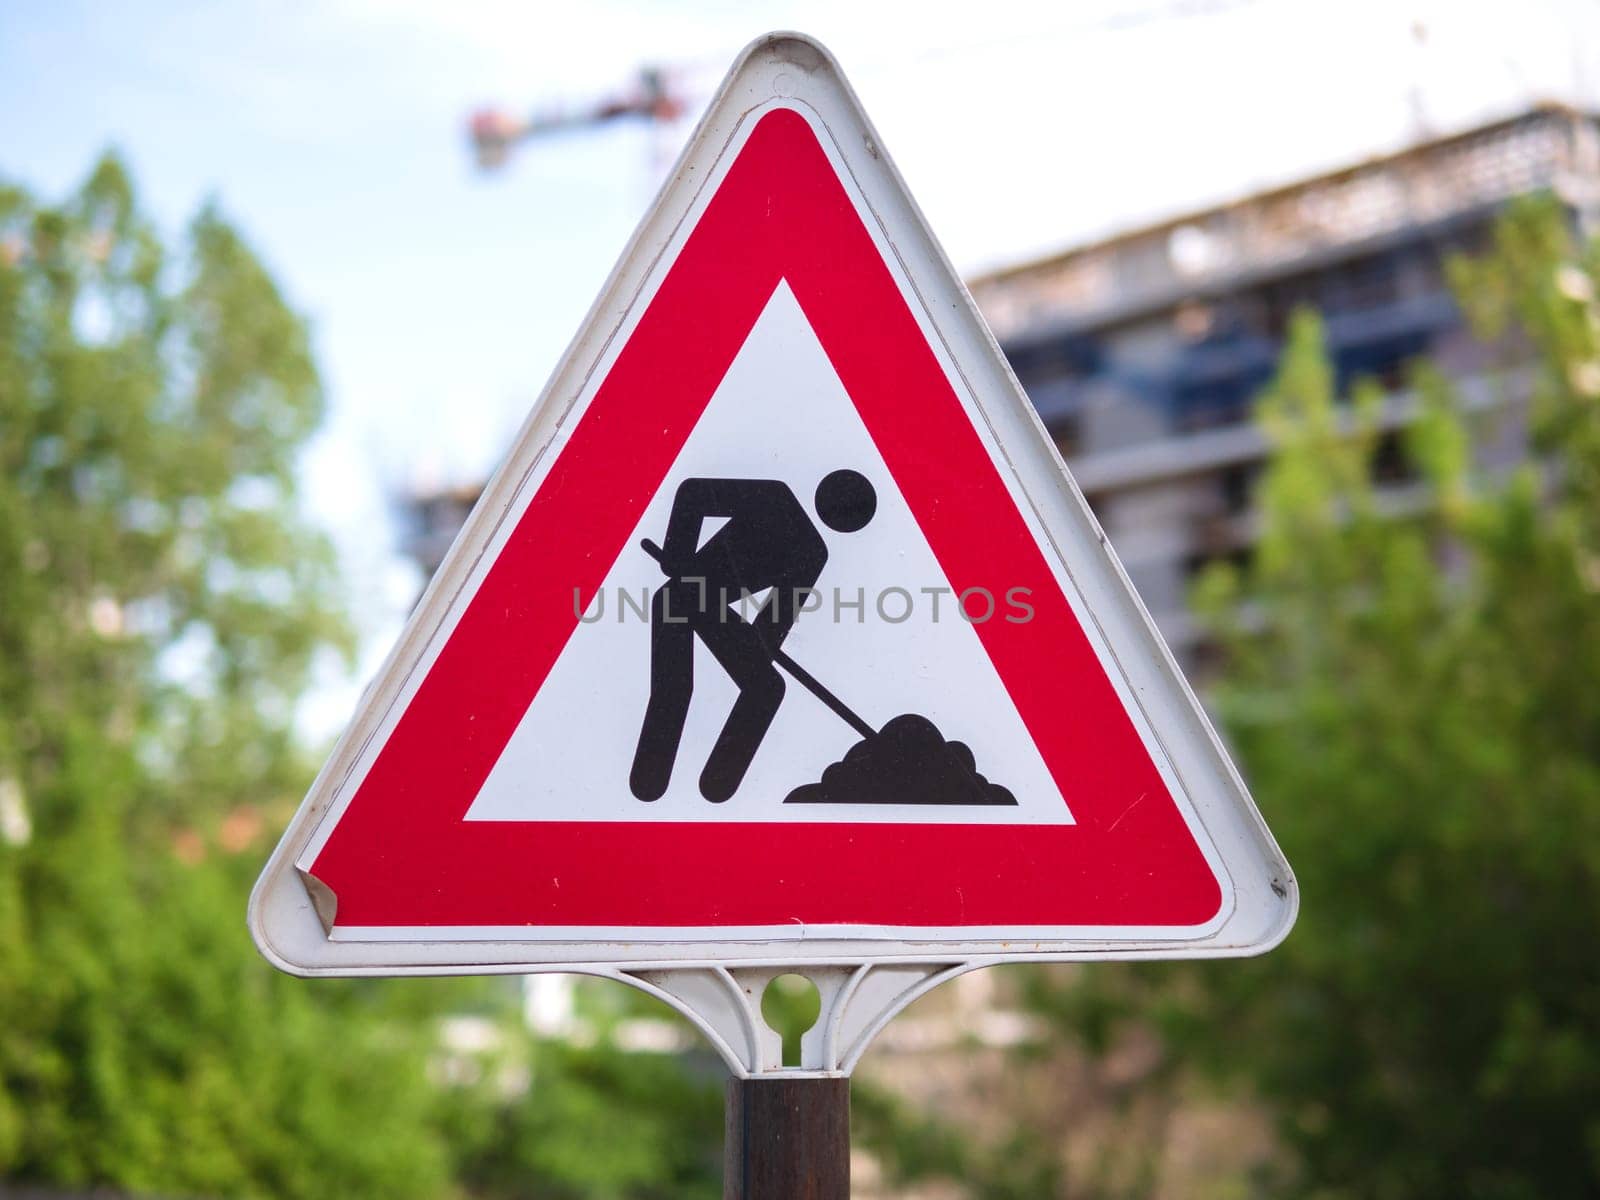 A construction sign with a triangle design. Road works sign. Red triangle sign with silhouette working person inside by jackreznor